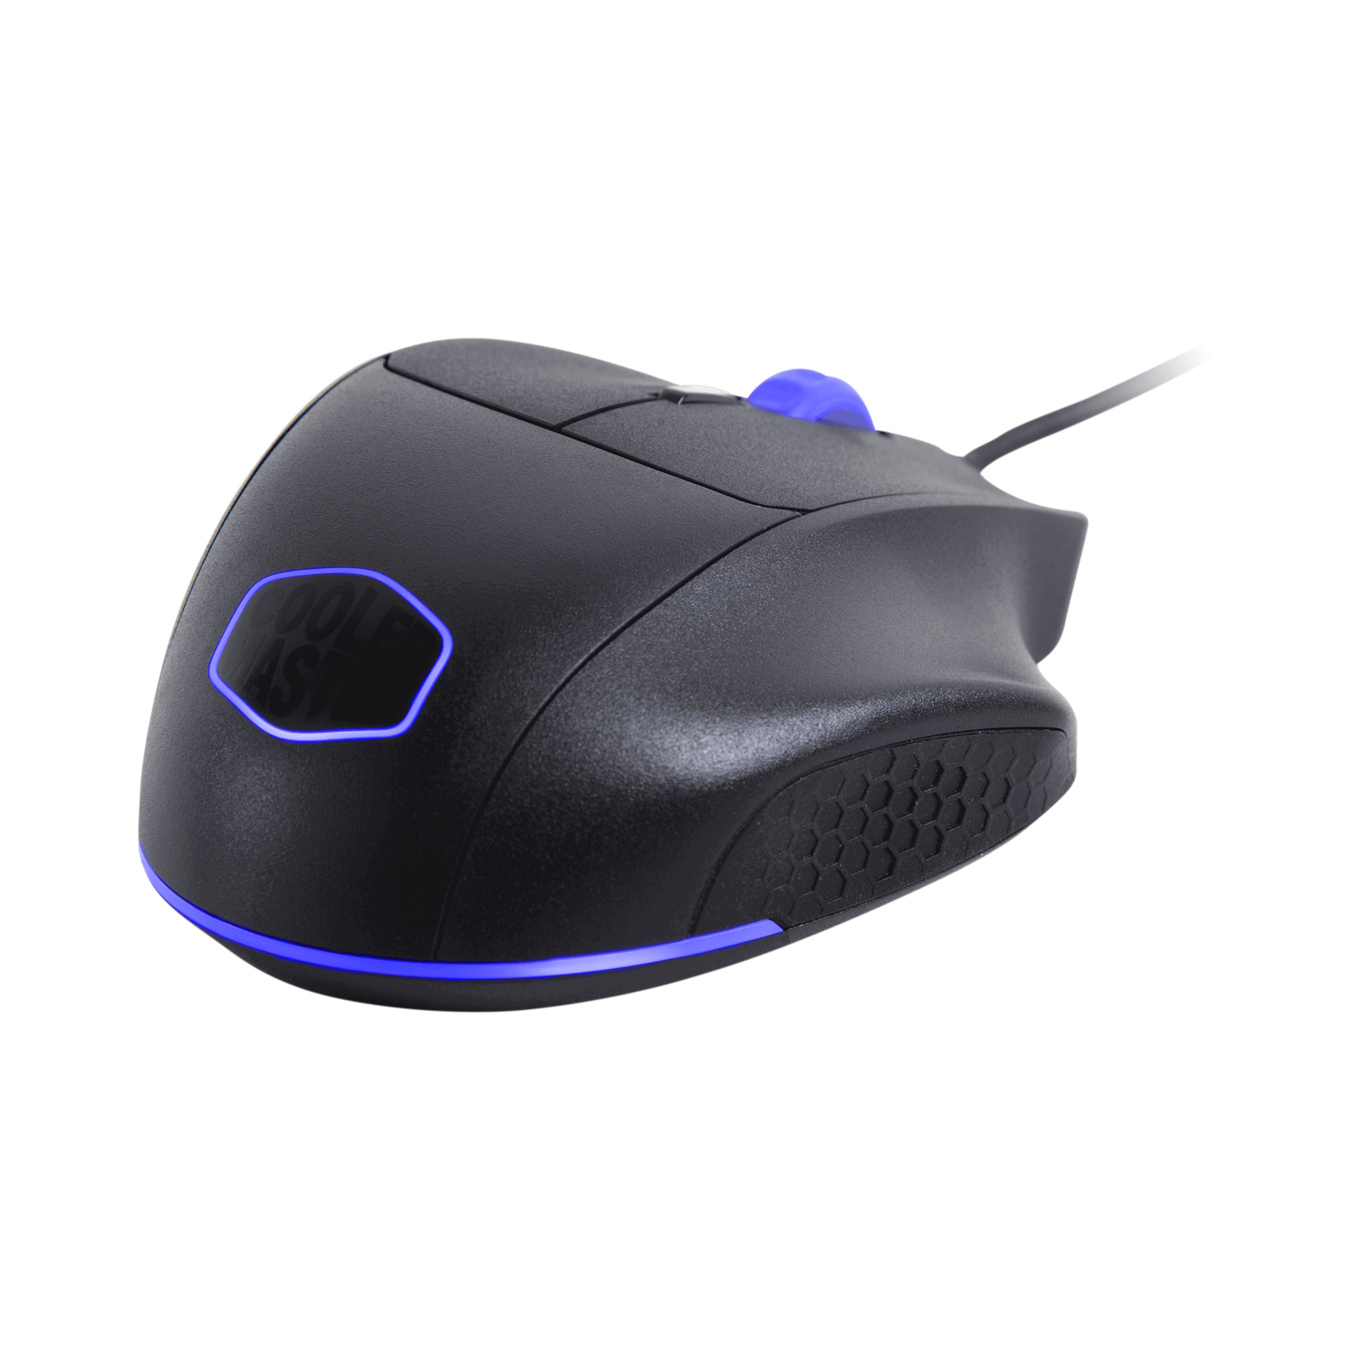 MasterMouse MM520 Gaming Mouse - On-the-Fly DPI Adjustments with 4 levels and 4 profiles to be set allowing you to shift gears in the heat of battle.